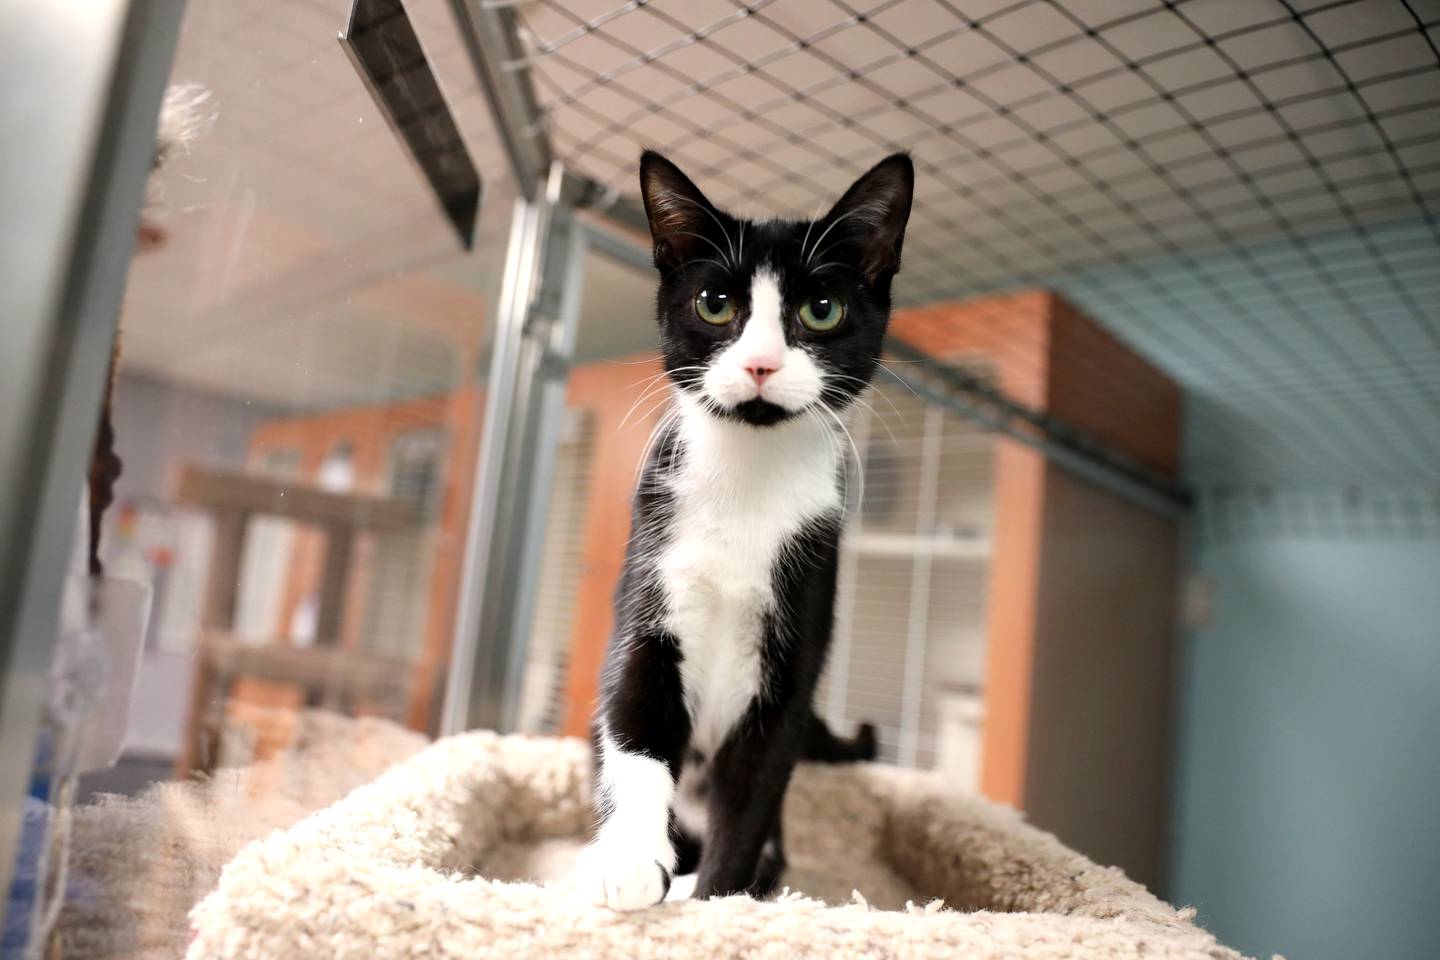 Bird, a cat available for adoption at Anderson Humane  in South Elgin. Animal rights advocates are backing a bill that would ban cat declawing. Those who adopt cats from Anderson Humane have to agree not to get the cats declawed.